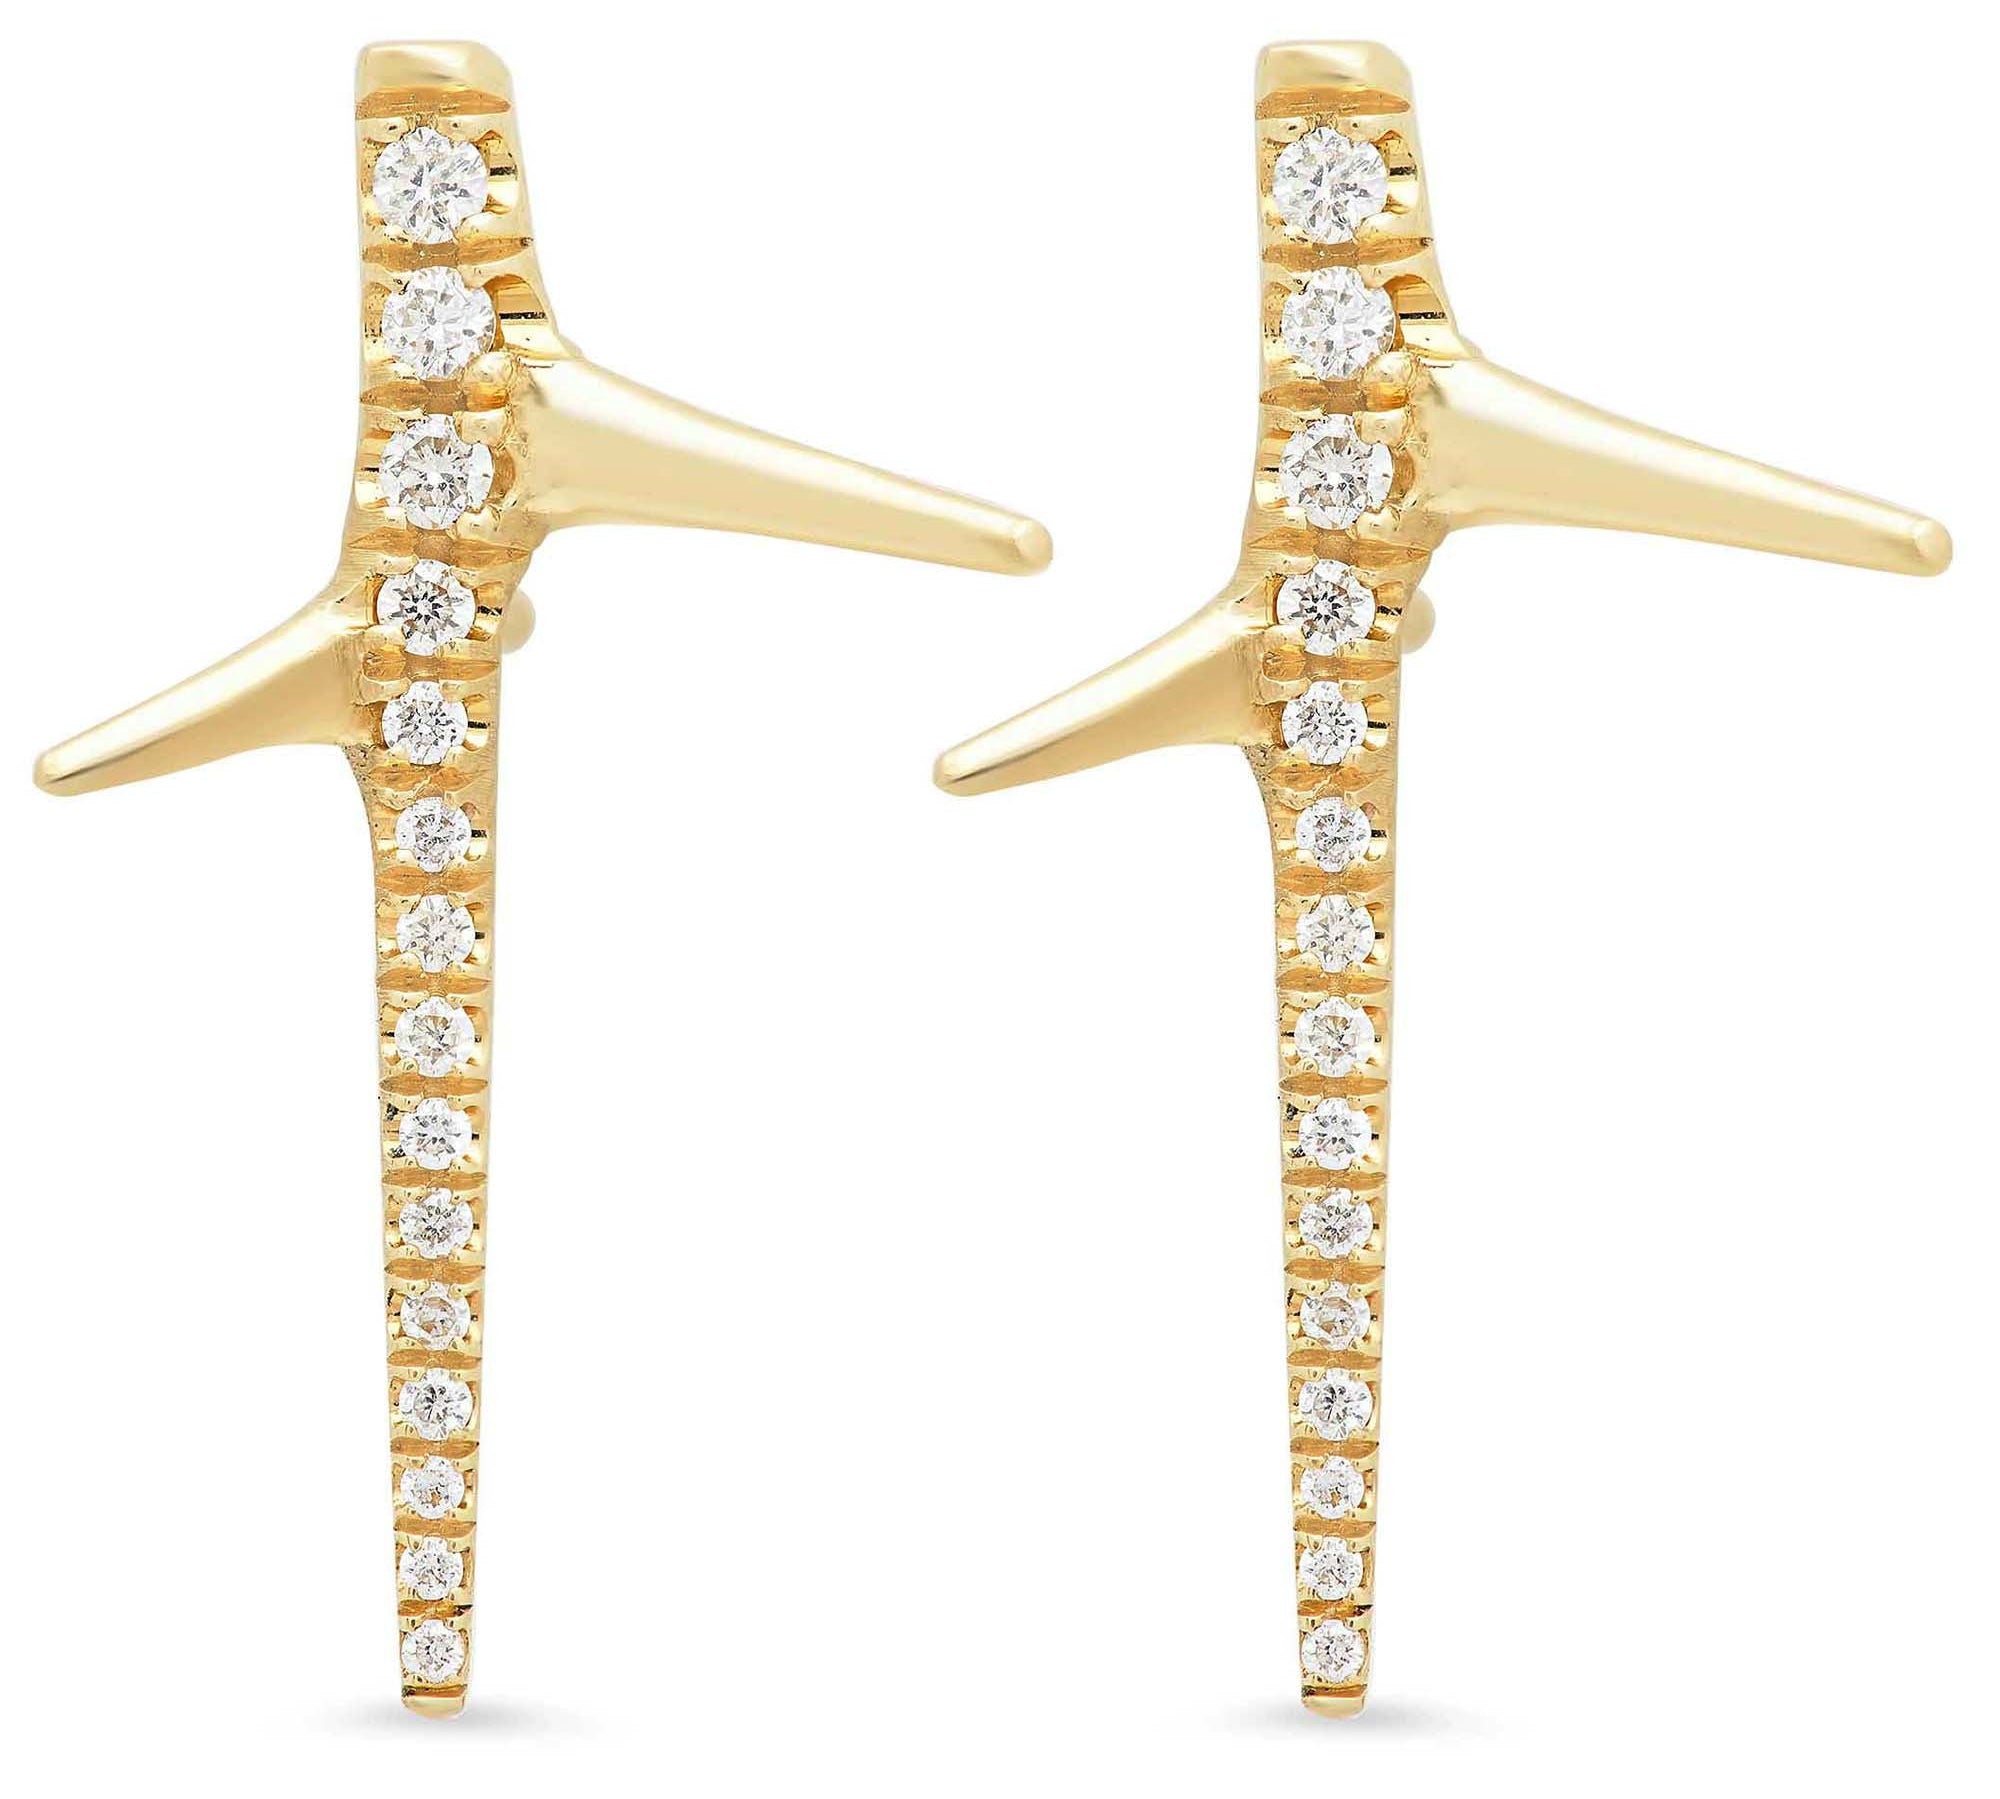 Thorn Studs Stud Earrings Elisabeth Bell Jewelry Yellow Gold with Diamonds  